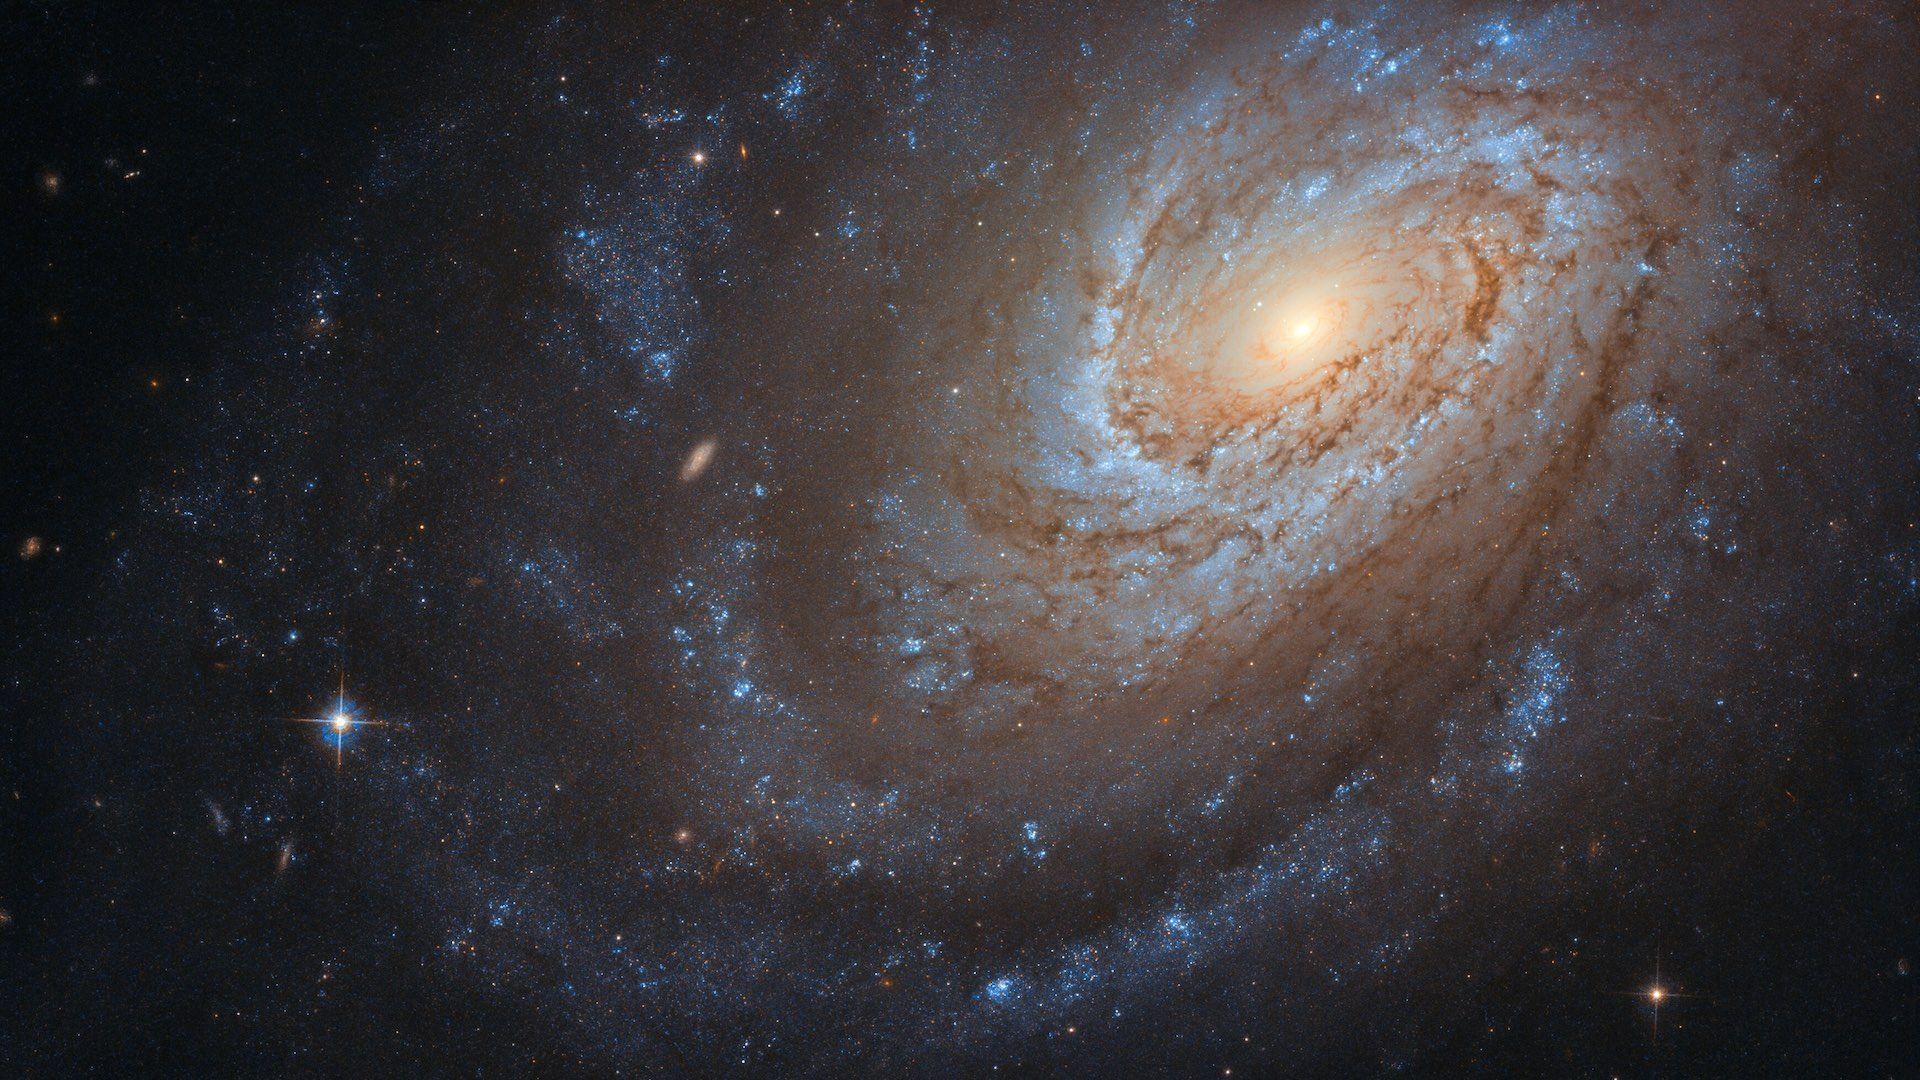 A galaxy seen by the Hubble Space Telescope